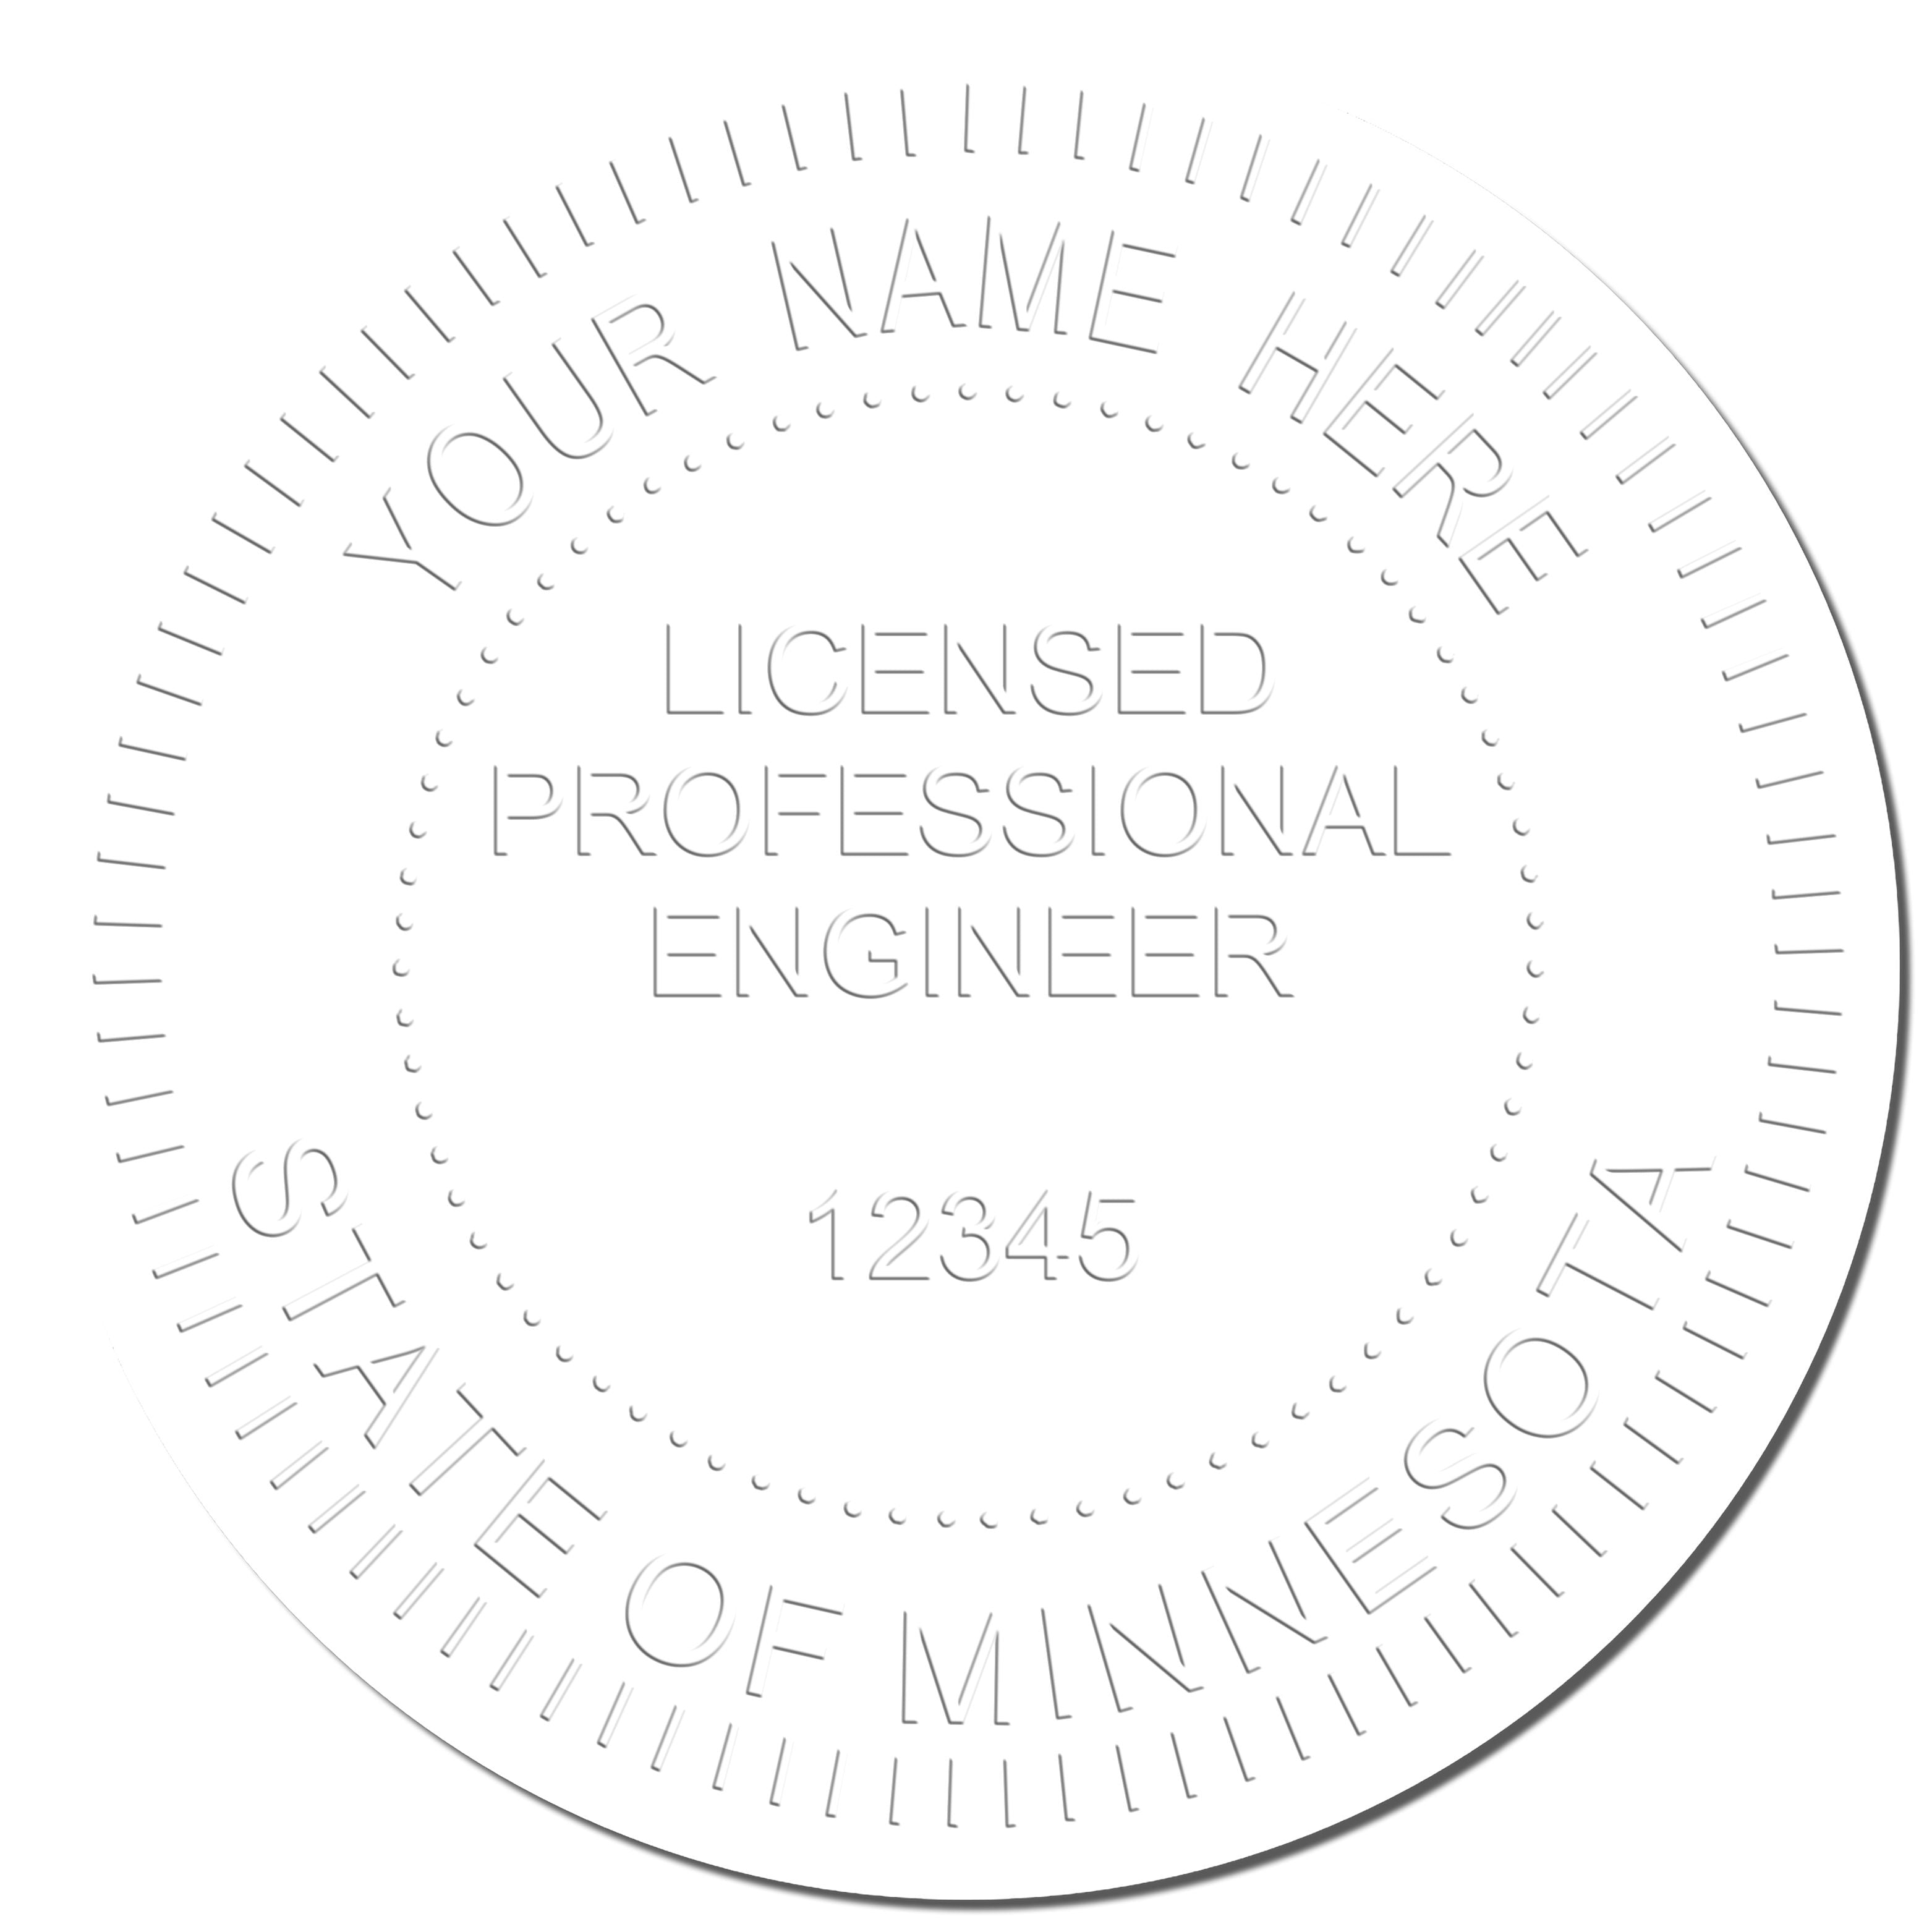 This paper is stamped with a sample imprint of the Gift Minnesota Engineer Seal, signifying its quality and reliability.